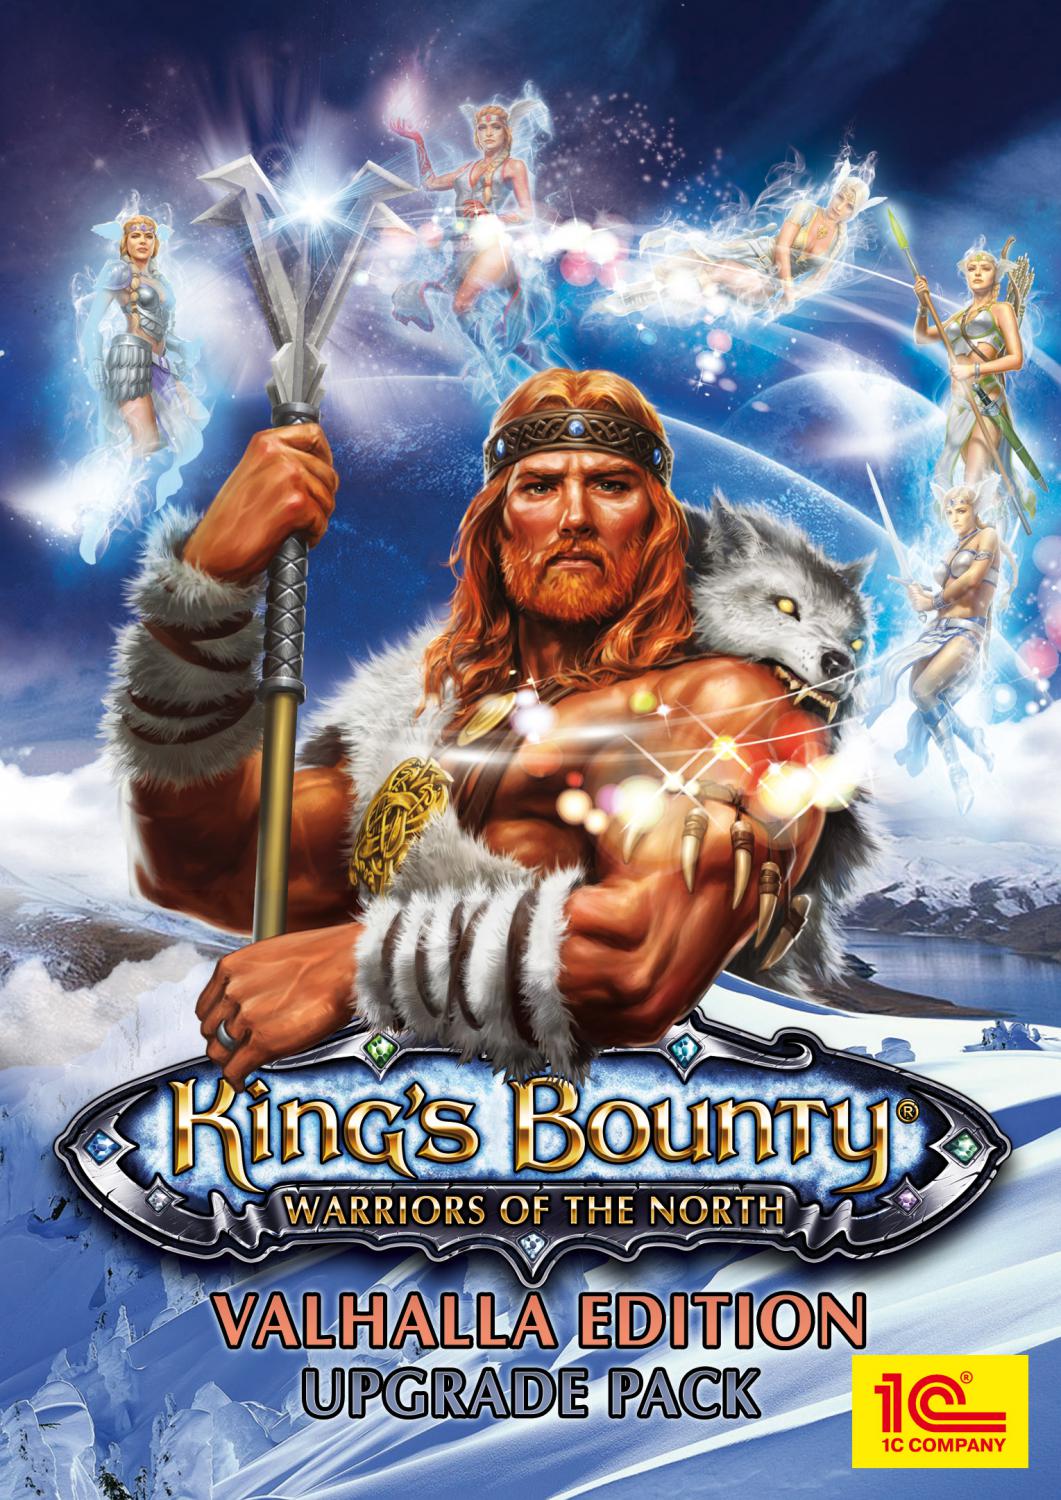 King's Bounty: Warriors of the North Valhalla upgrade